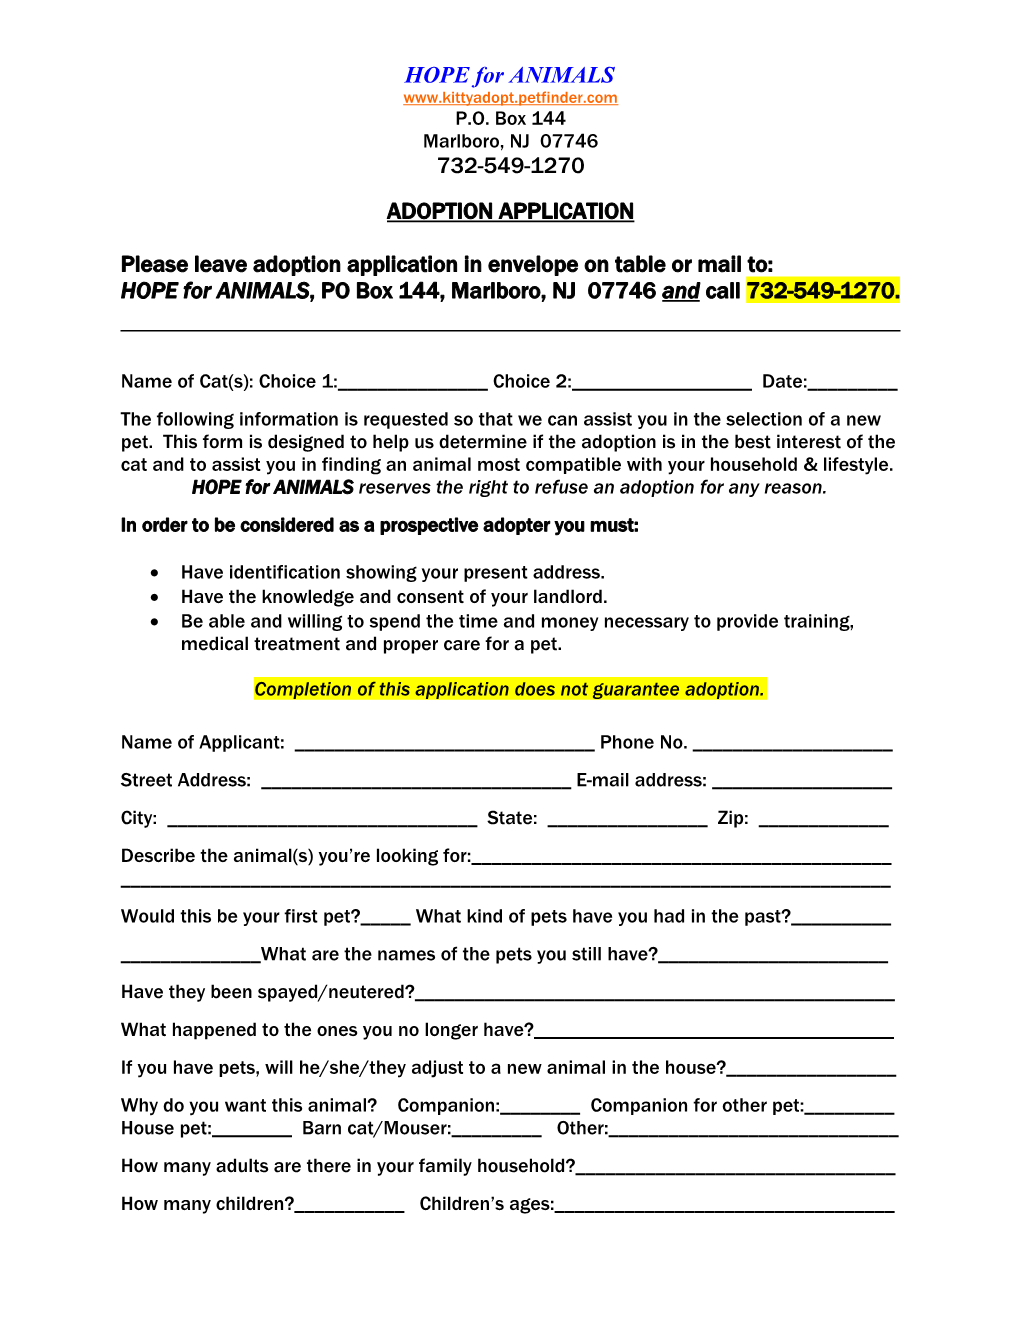 Please Leave Adoption Application in Envelope on Table Or Mail To